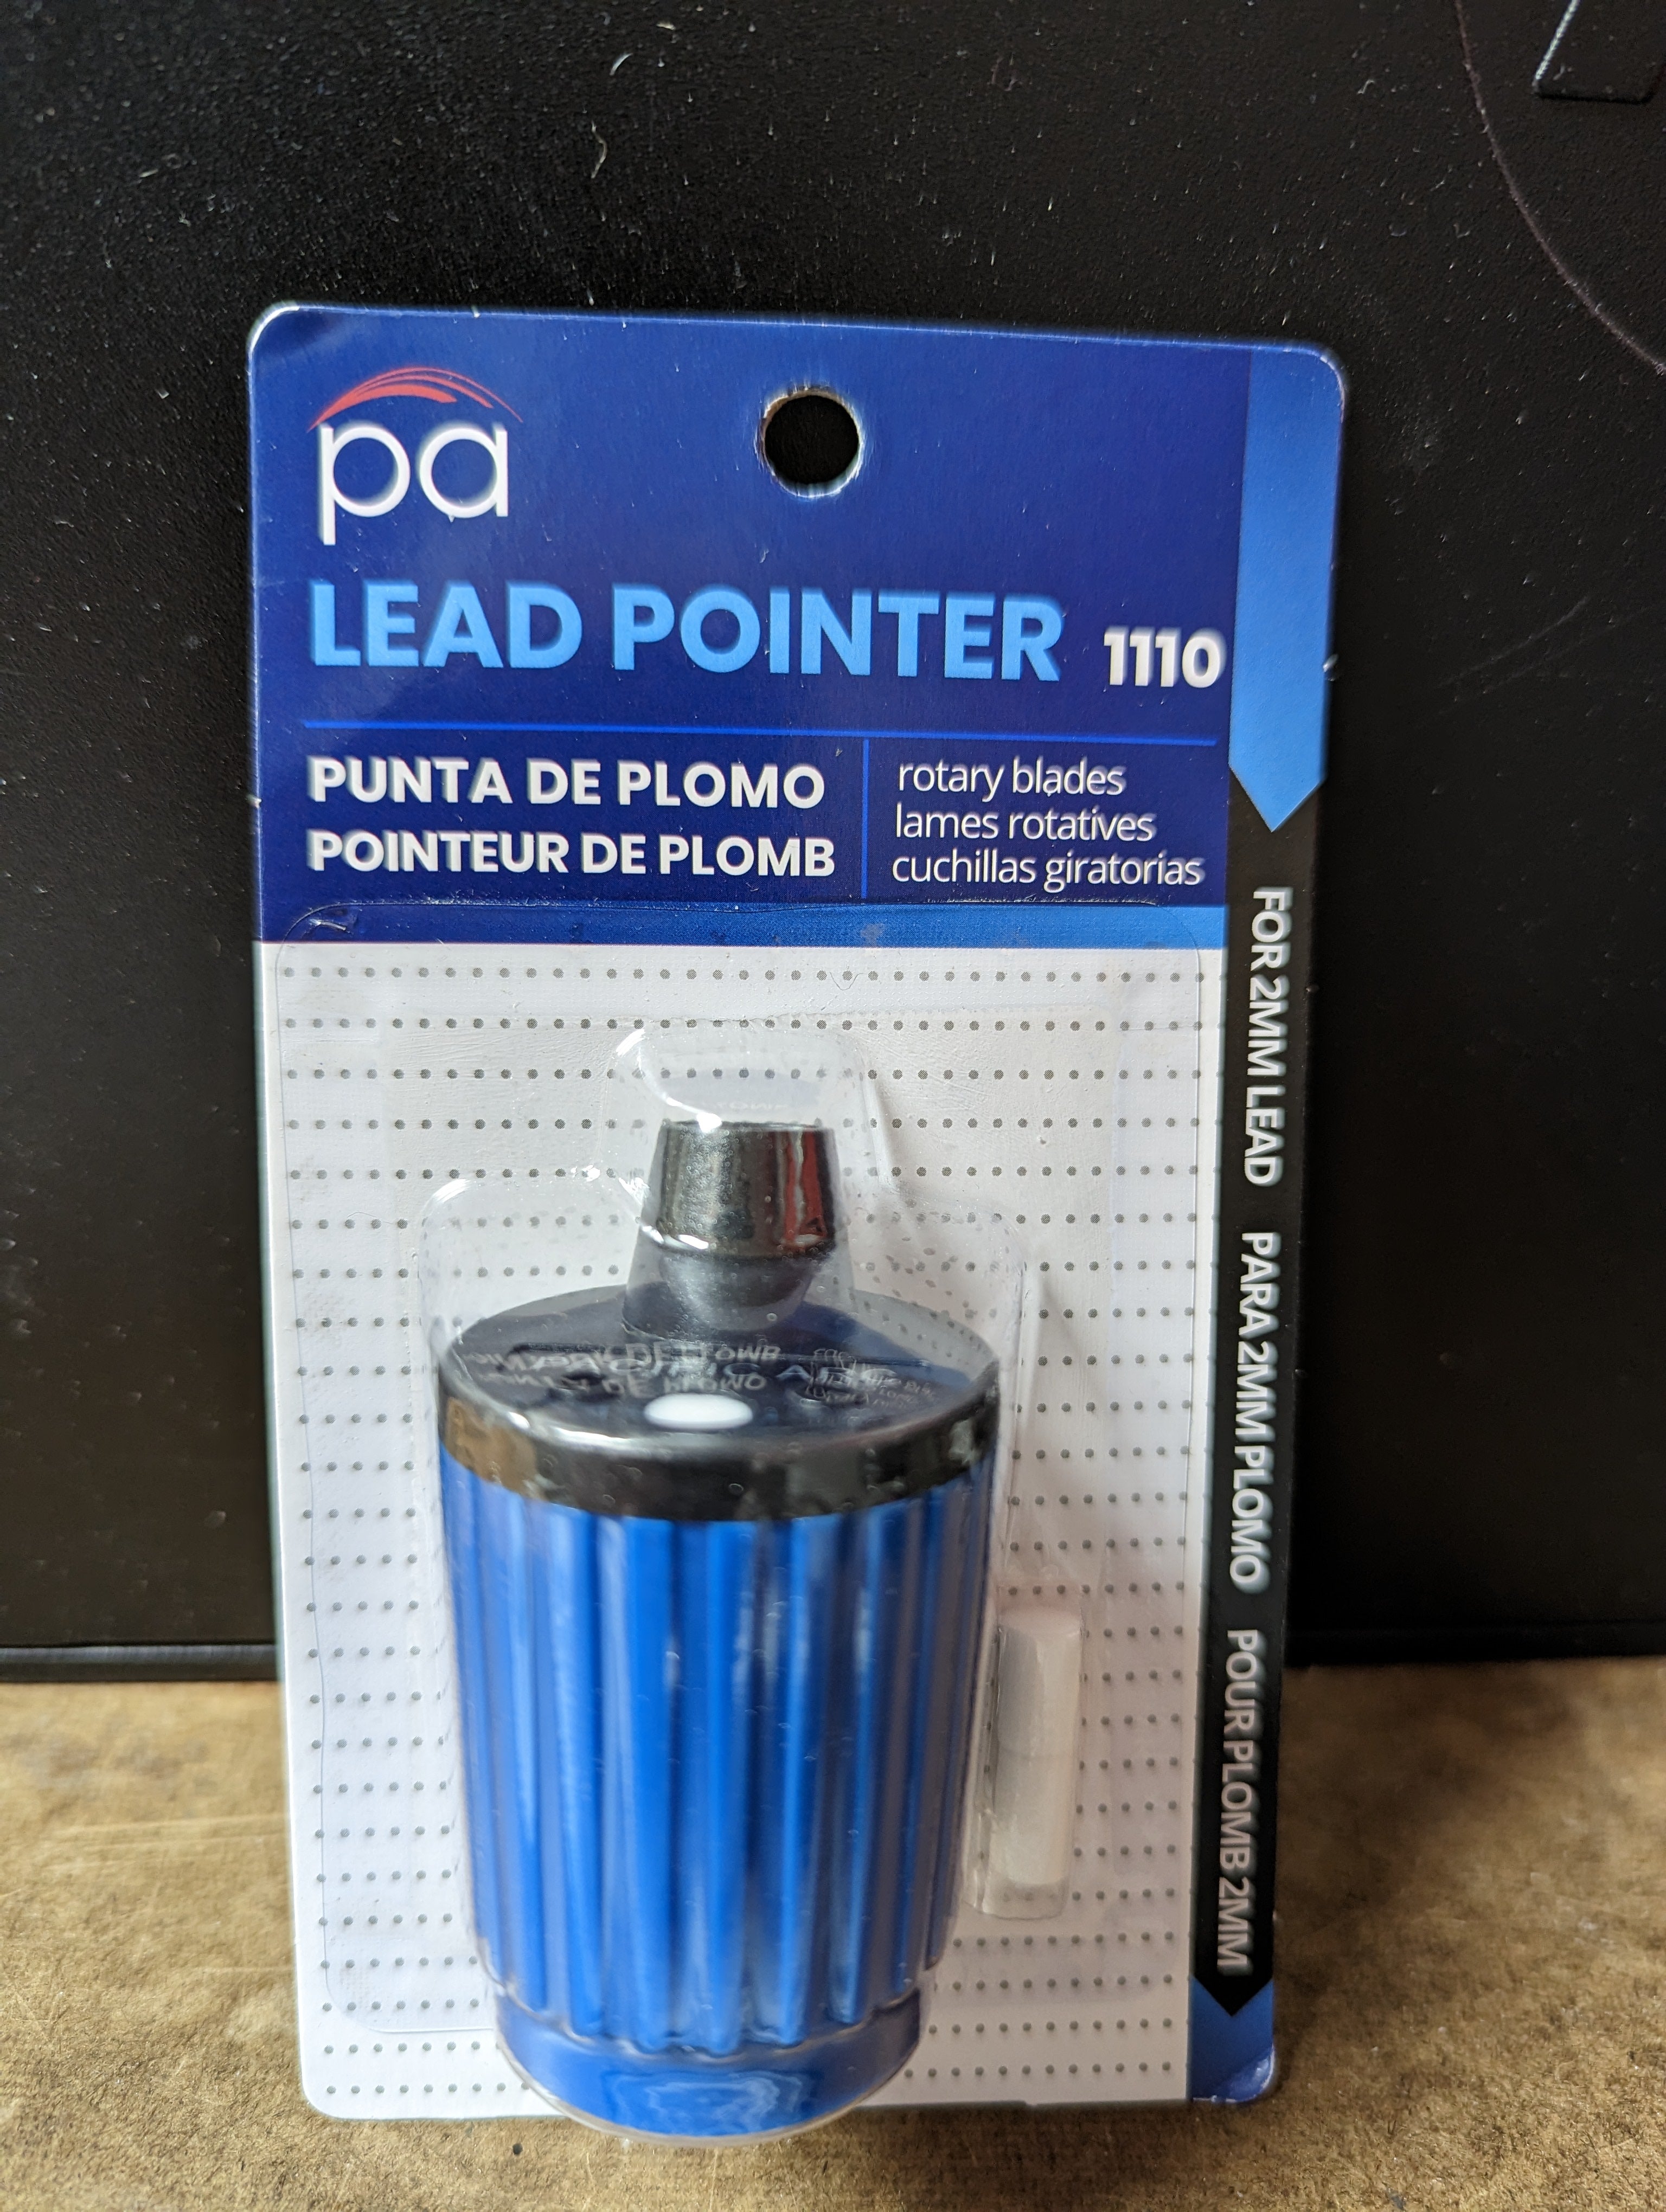 LEAD POINTER PAC 1110